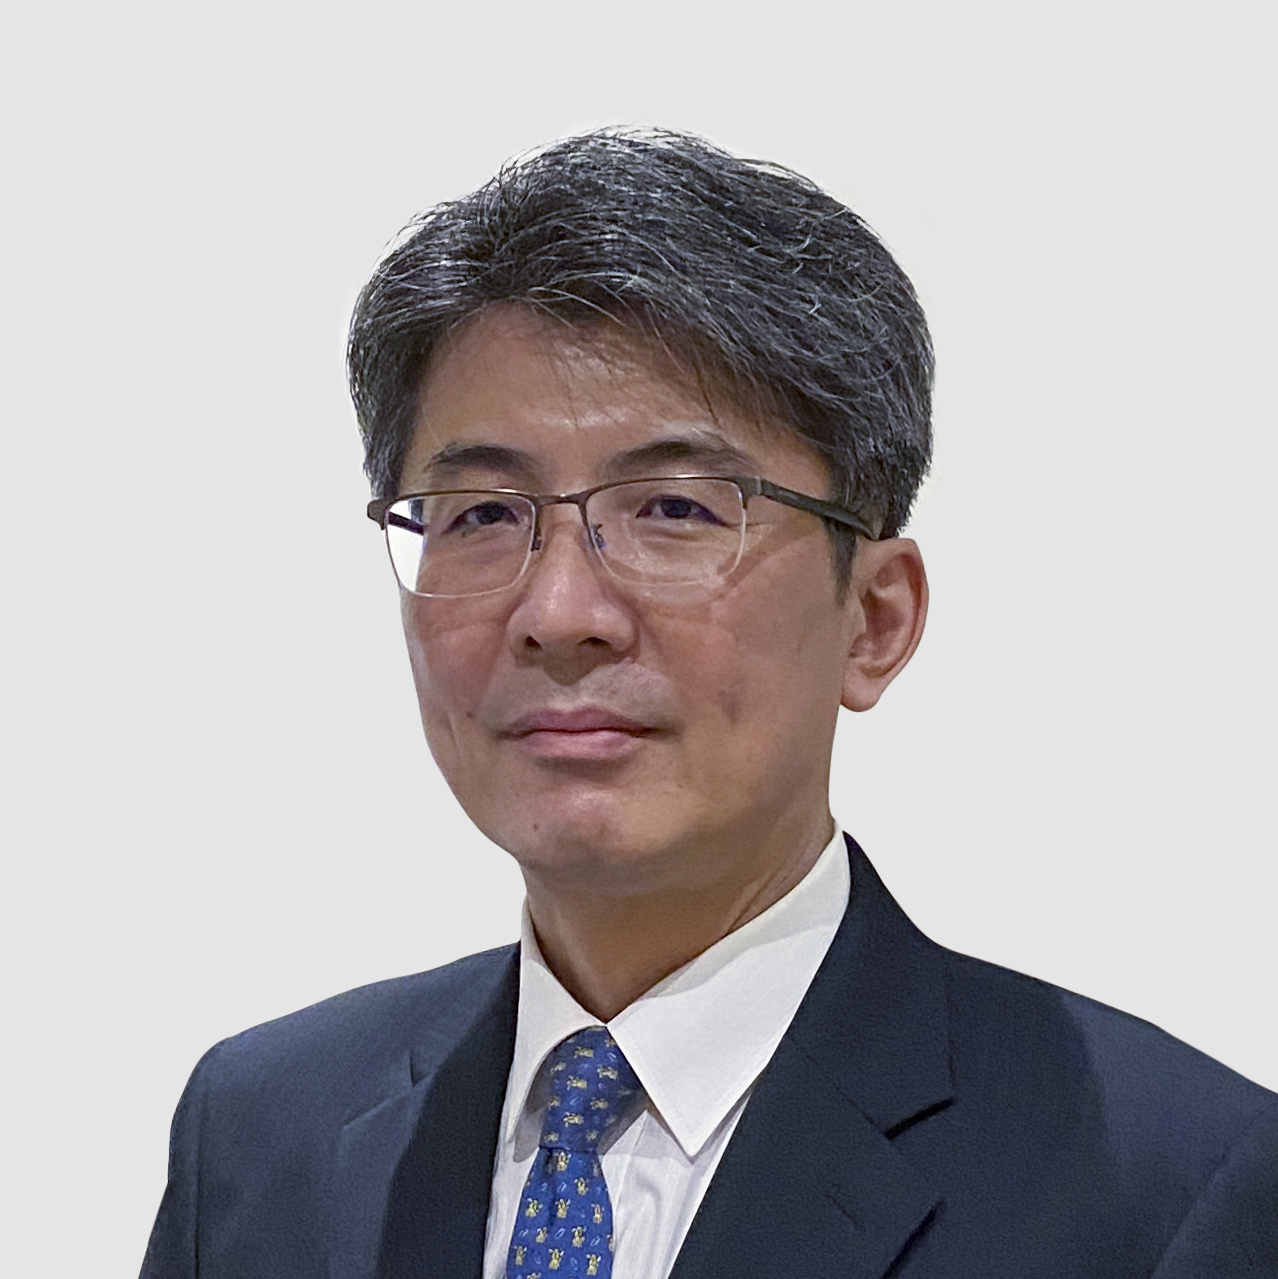 Satoru Ise is the Vice President of Global Research & Development. Ise was elevated into this role in April of 2023 after successfully serving as the Managing Director, Essex Furukawa Magnet Wire Malaysia. Ise transitioned to the Essex Furukawa team after spending three years as Managing Director, Essex Furukawa Magnet Wire Europe GmbH during an initial 2017 joint venture and HVWW® development. Over the past 20 years, Ise has held positions of increasing responsibility in business development. Prior to his work with Essex Furukawa he was a Director, Business planning and development, OFS Fitel LLC. as well as Manager, Overseas Business Development Team, Planning and Administration department, Telecommunications Company. Ise obtained his degree from Kansai University, Faculty of Engineering, in Osaka, Japan. 